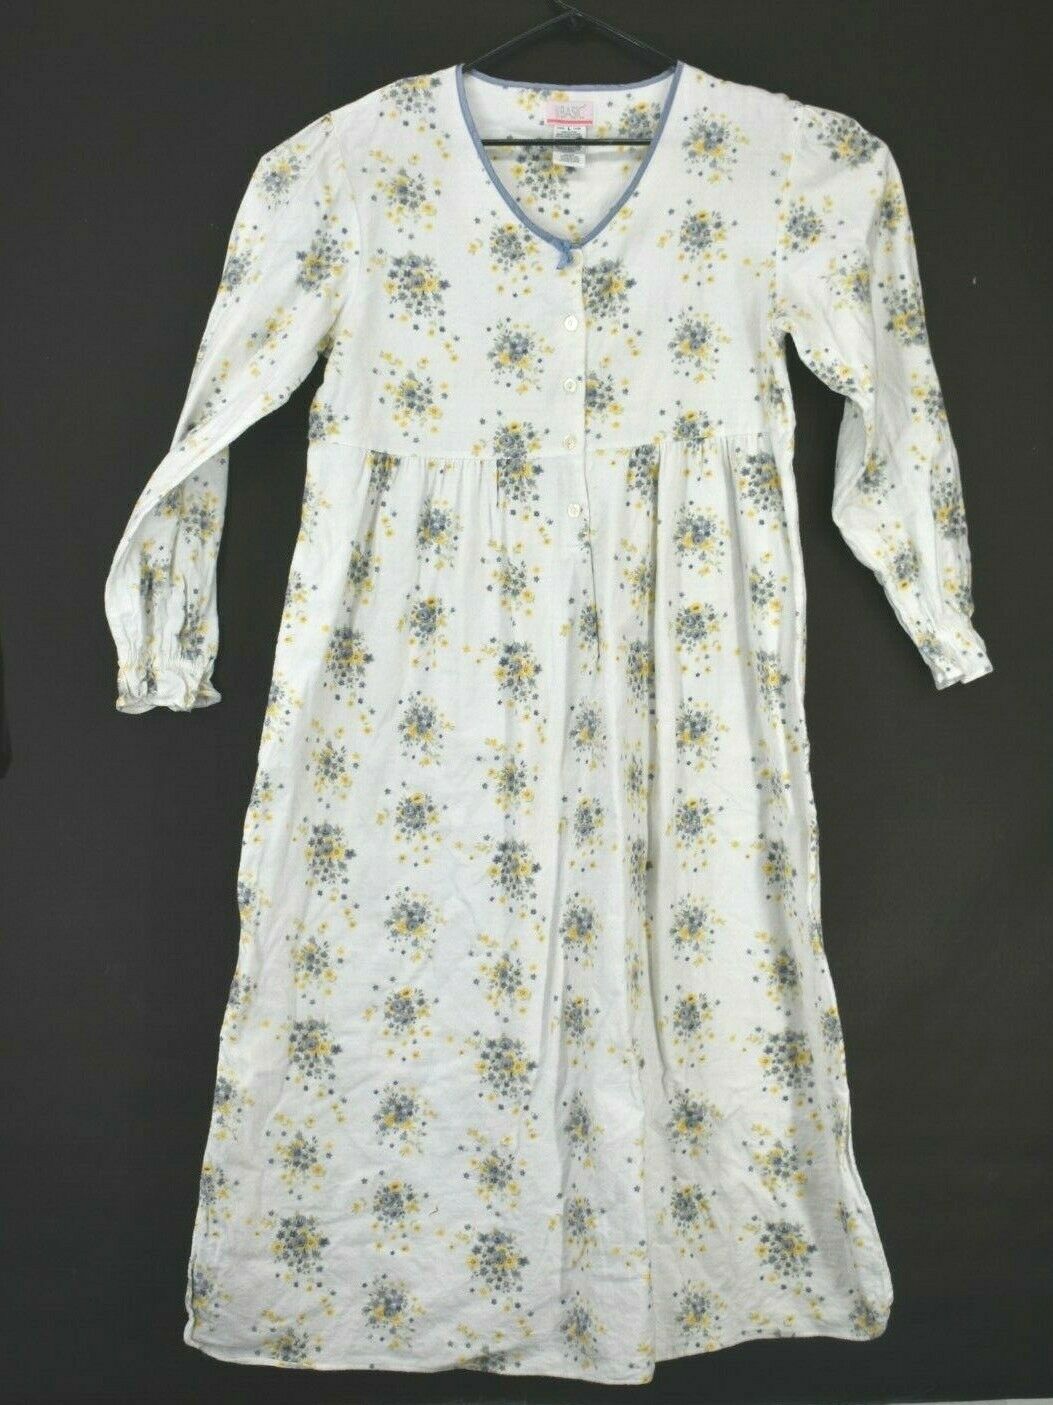 Simply Basic Women's Large Vintage Button Up Nightgown Pajama Dress ...